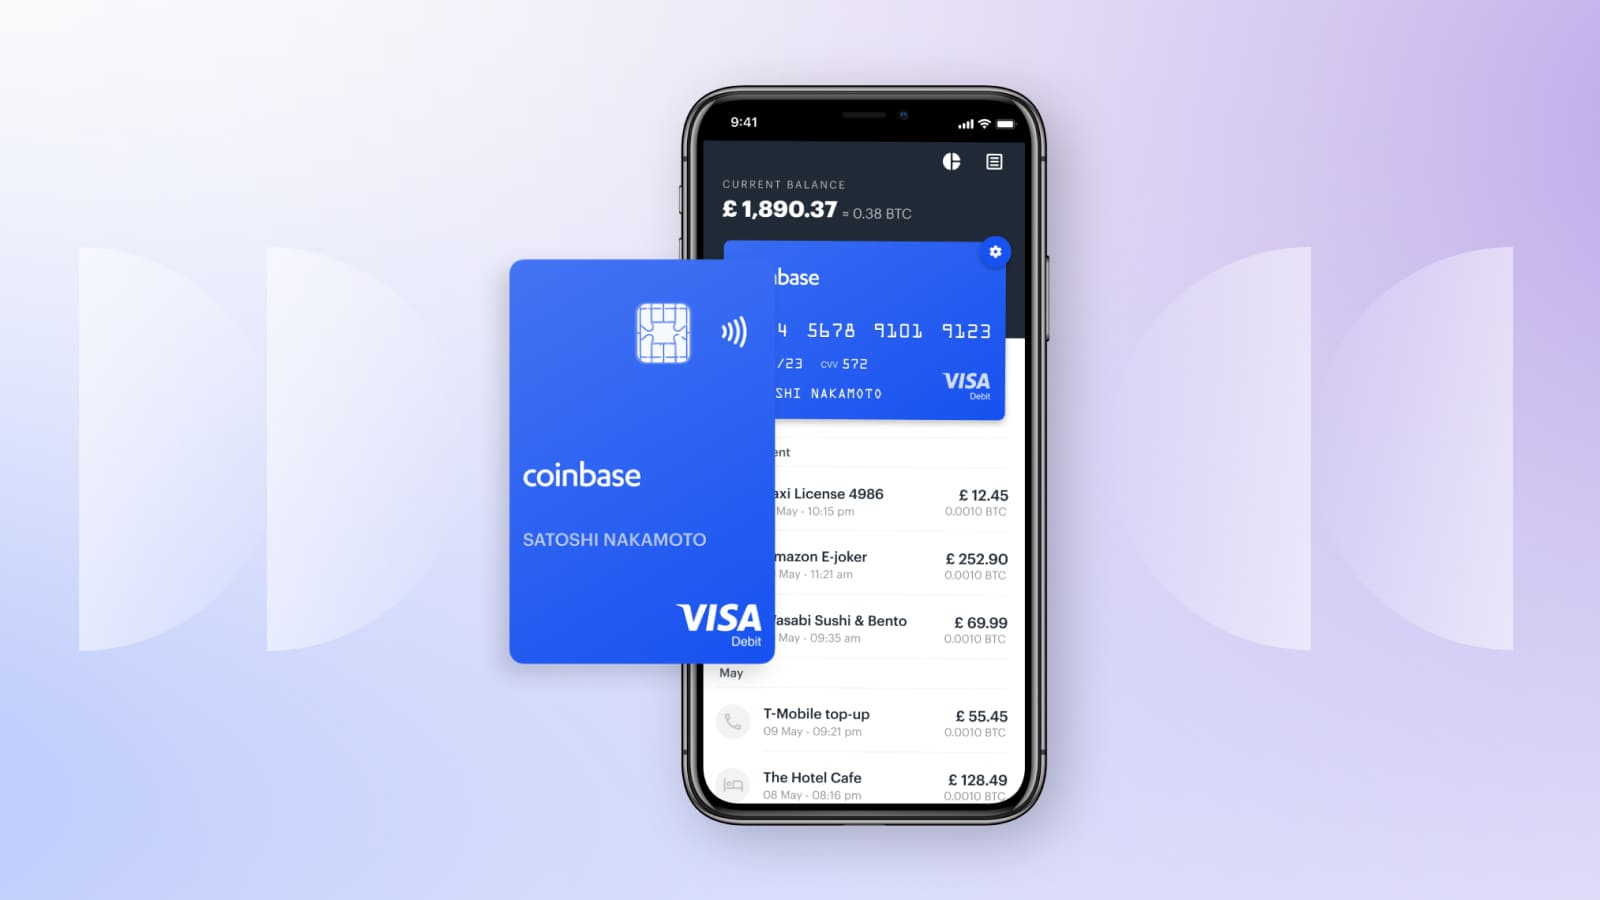 Get cryptocurrency bonuses for using your Coinbase Card.